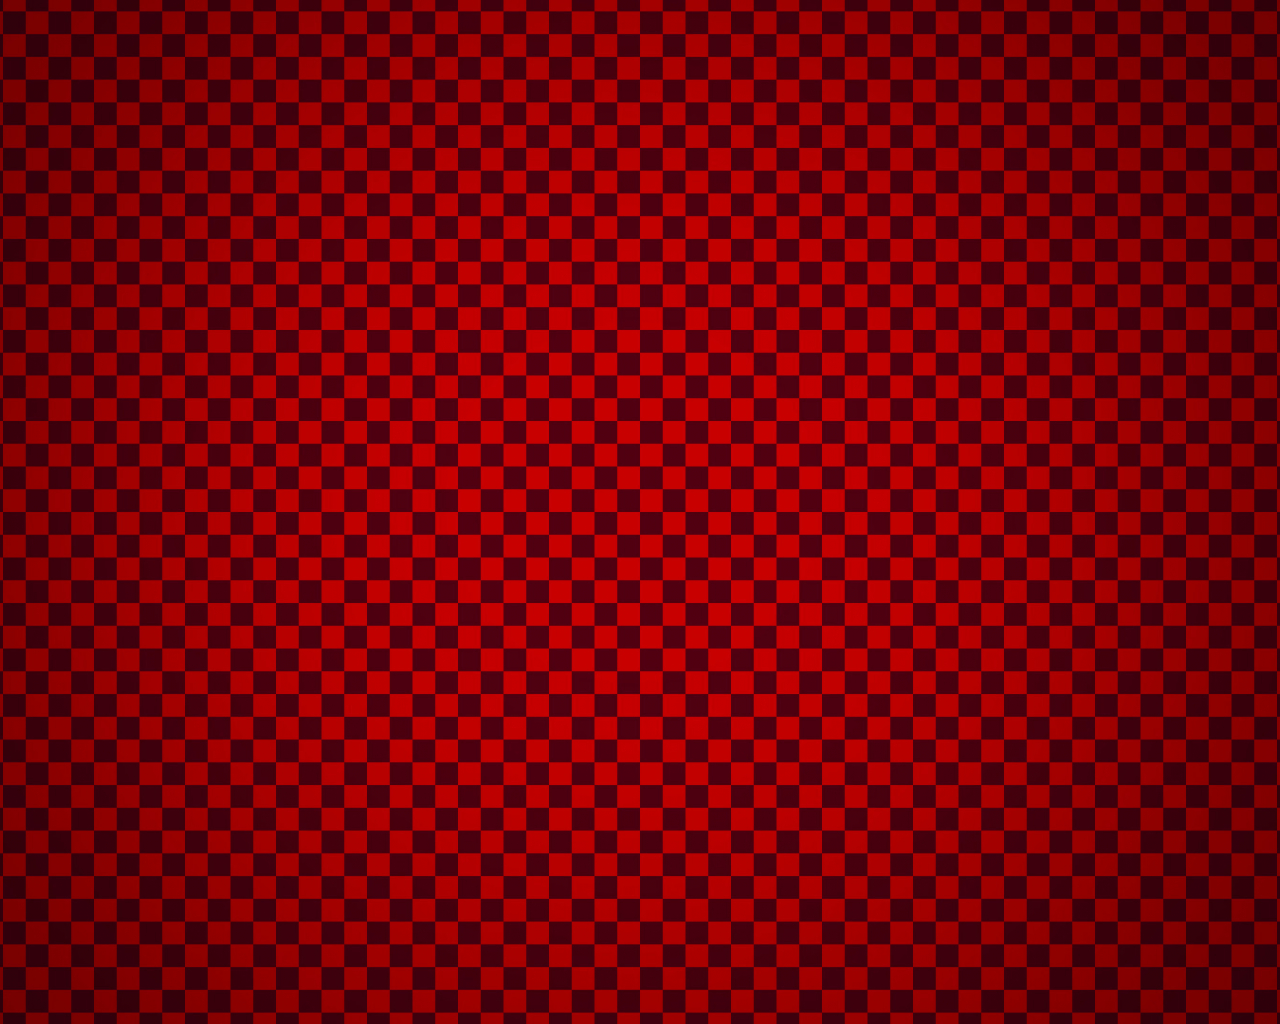 Checkered Pattern Wallpapers - Wallpaper Cave